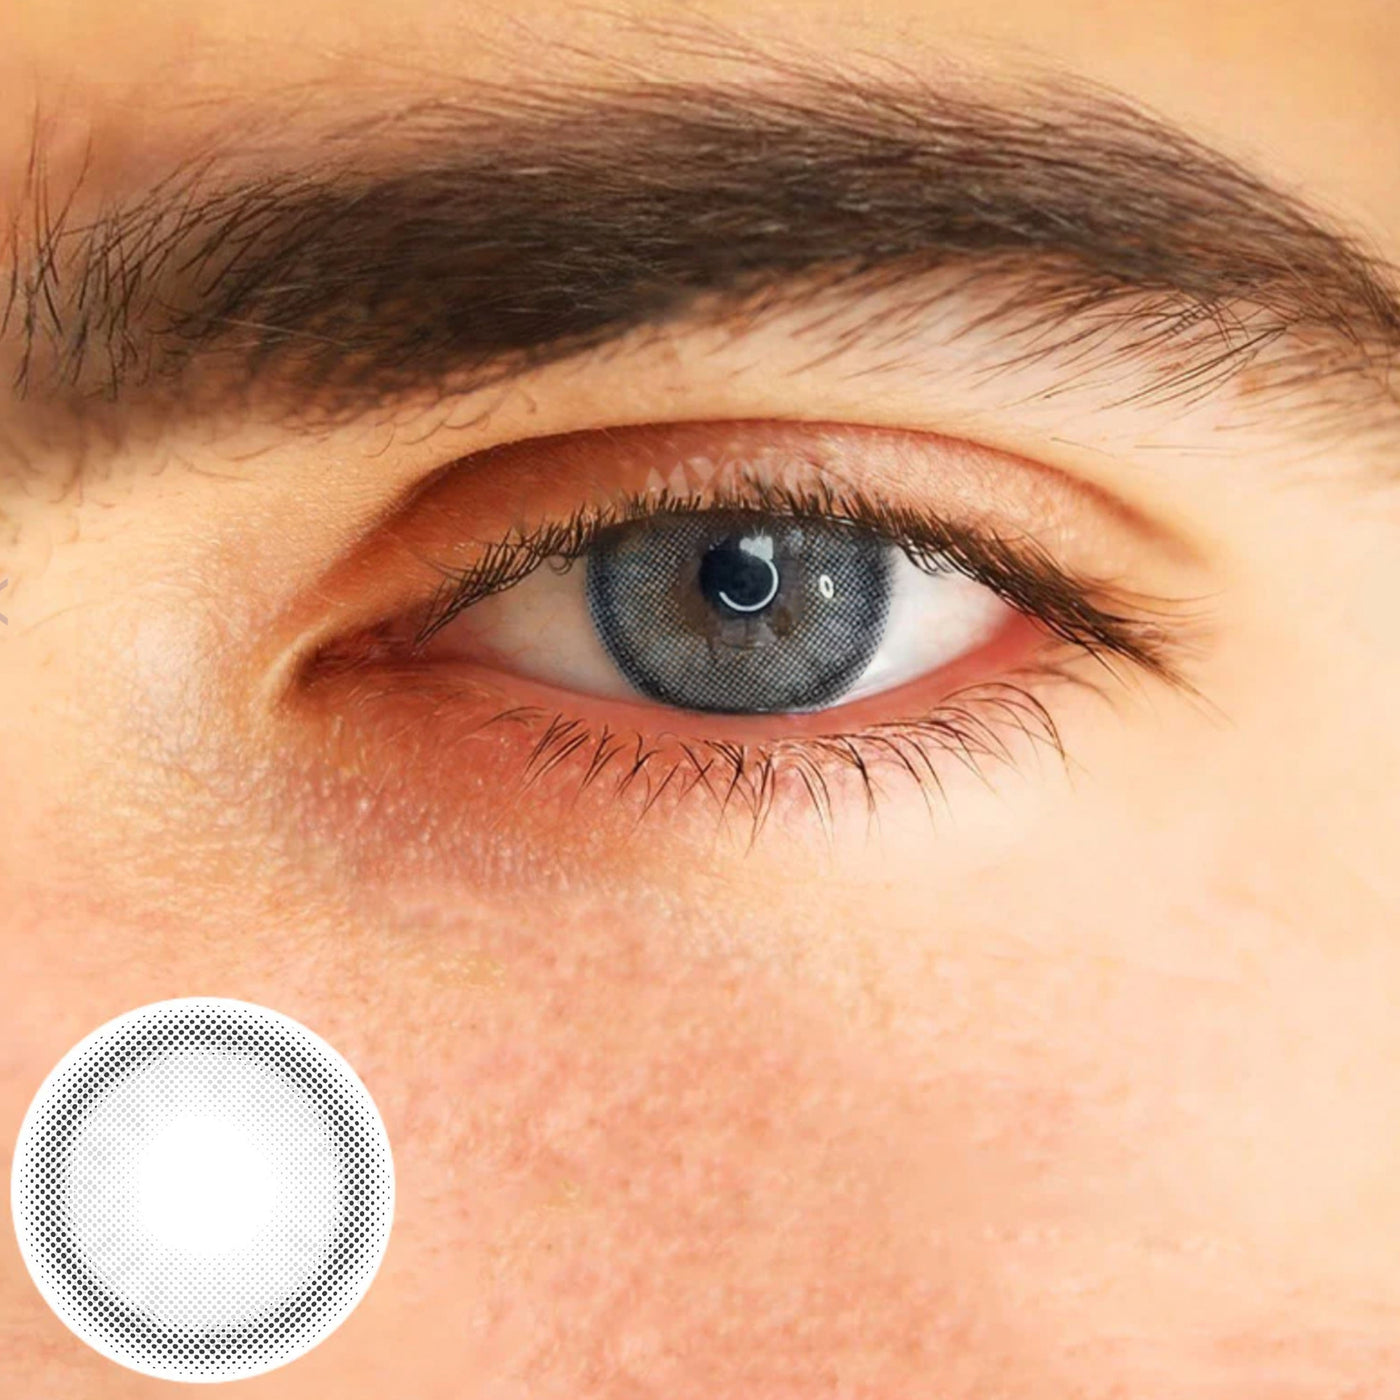 2Dadoll coko grey Men Colored Contact Lenses(1 pair/6 months)